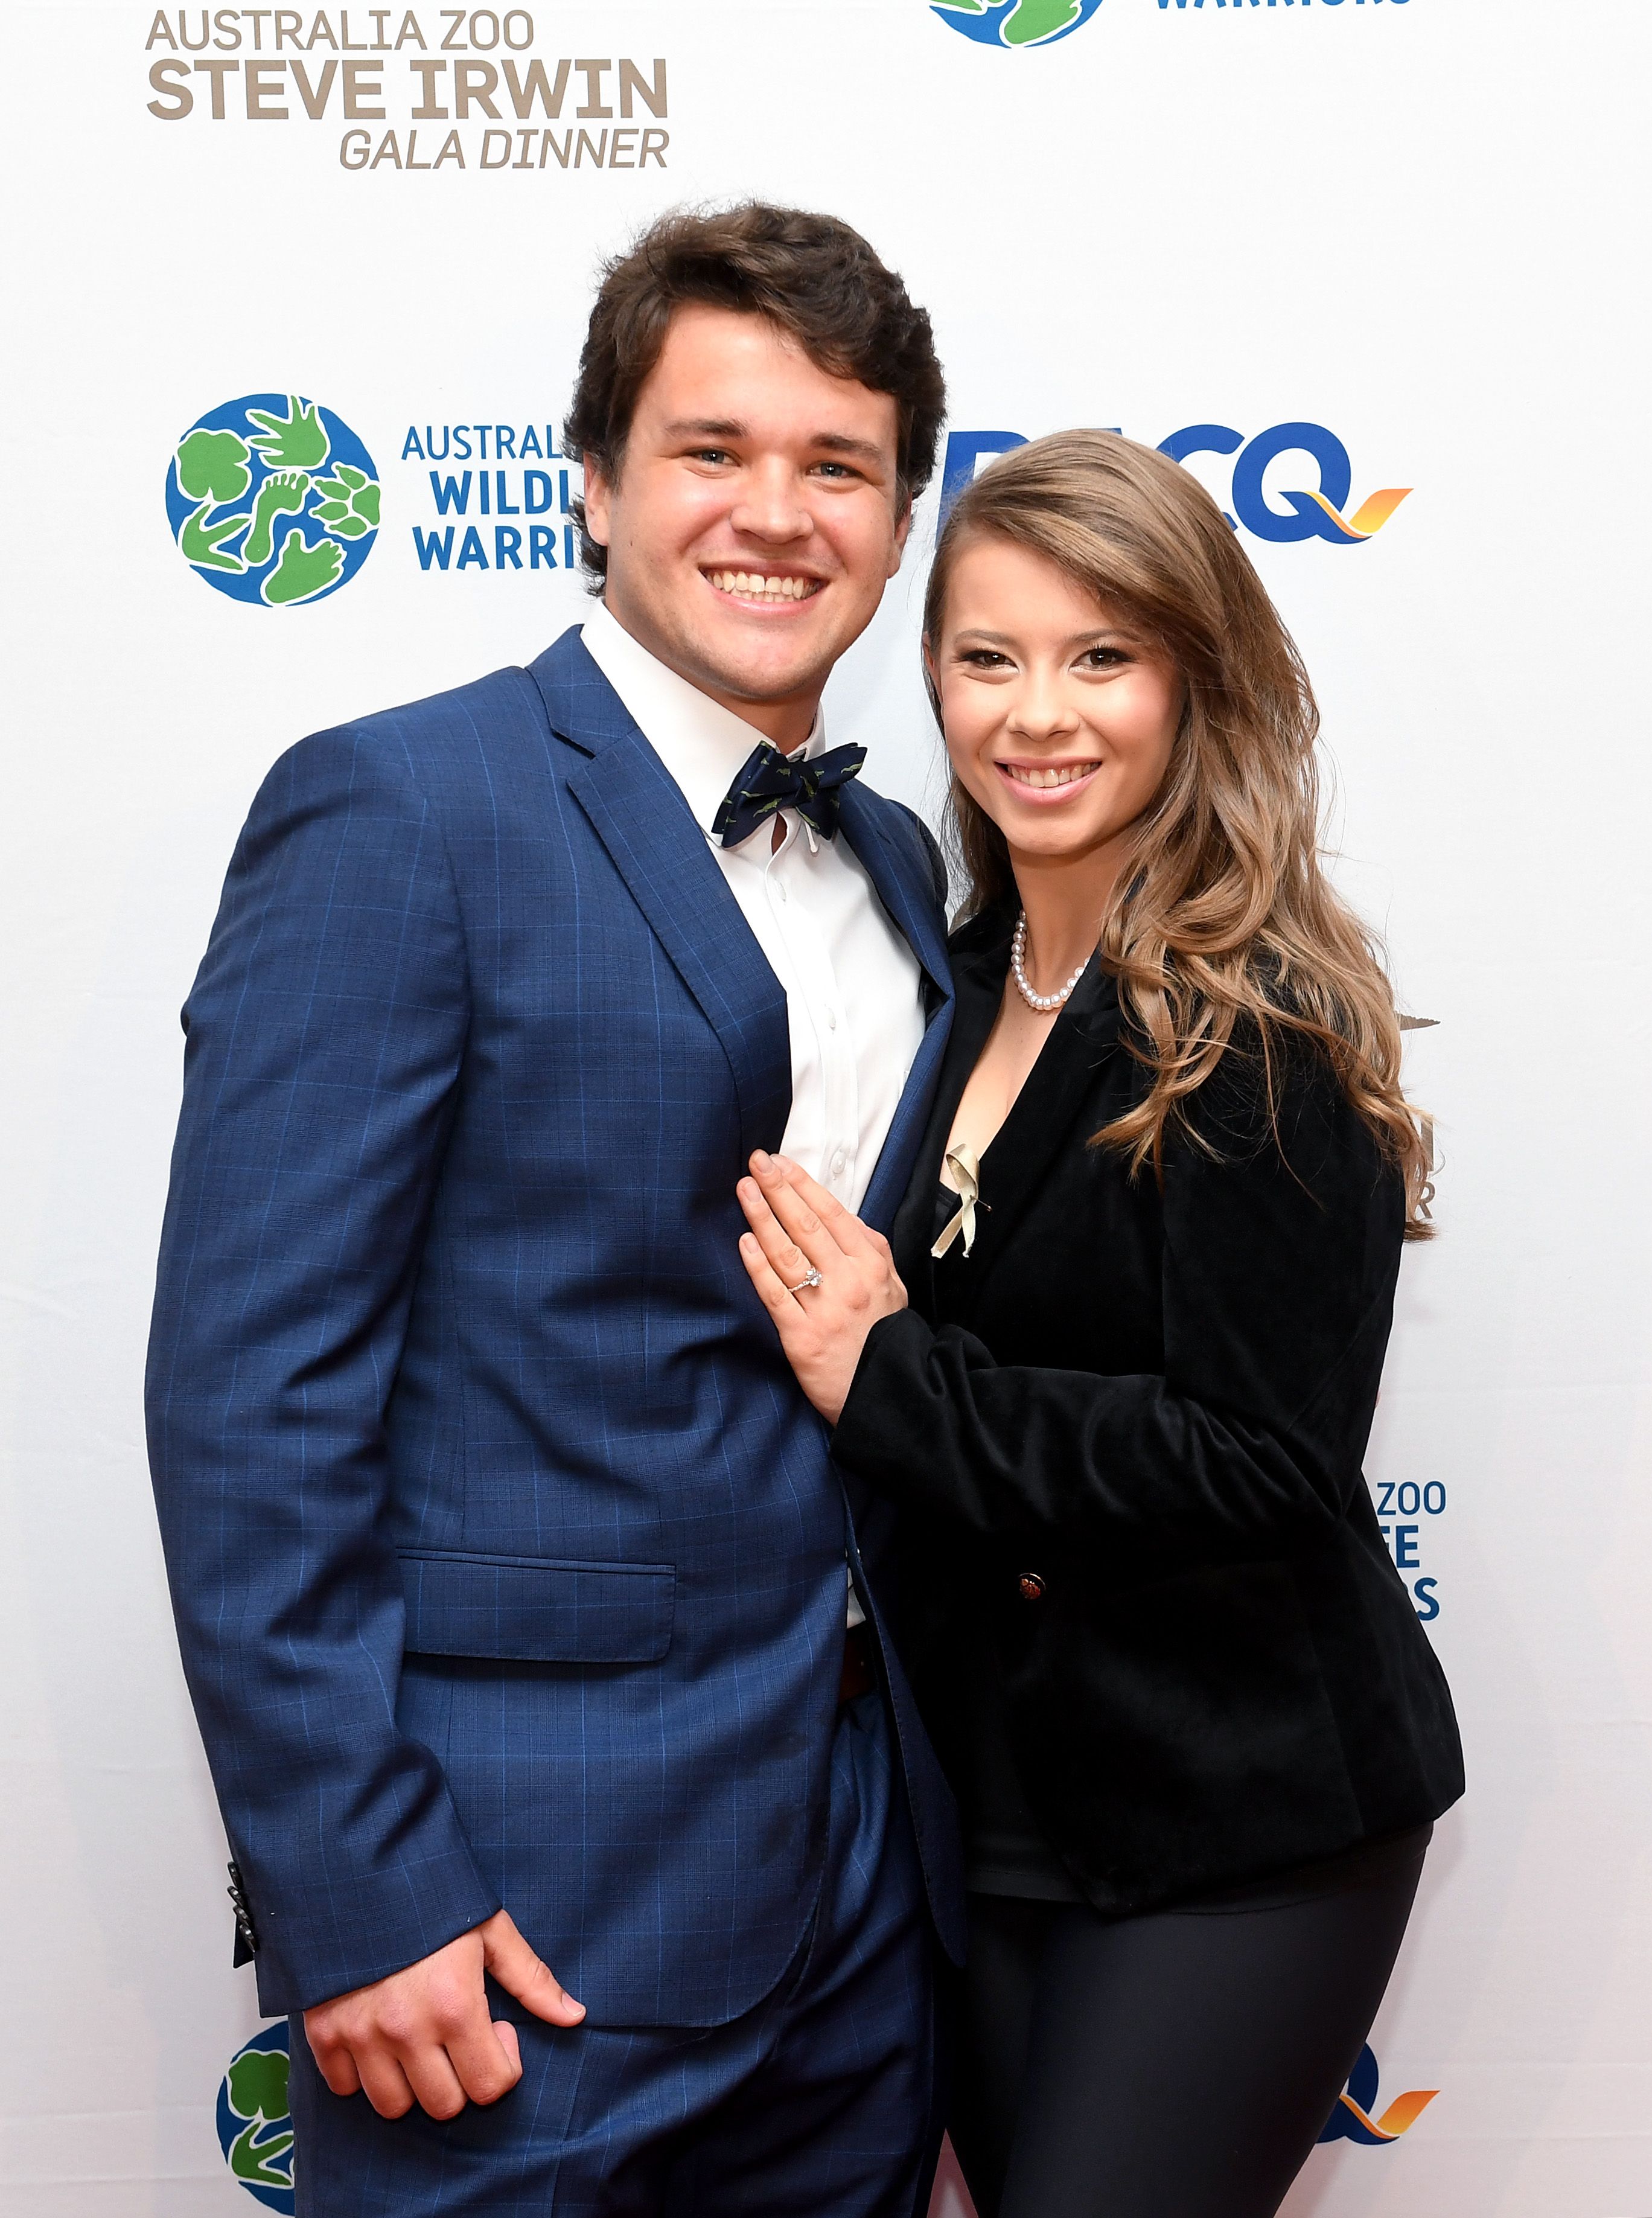 Bindi Irwin and Chandler Powell at the annual Steve Irwin Gala Dinner at Brisbane Convention & Exhibition Centre on November 09, 2019 | Photo: Getty Images